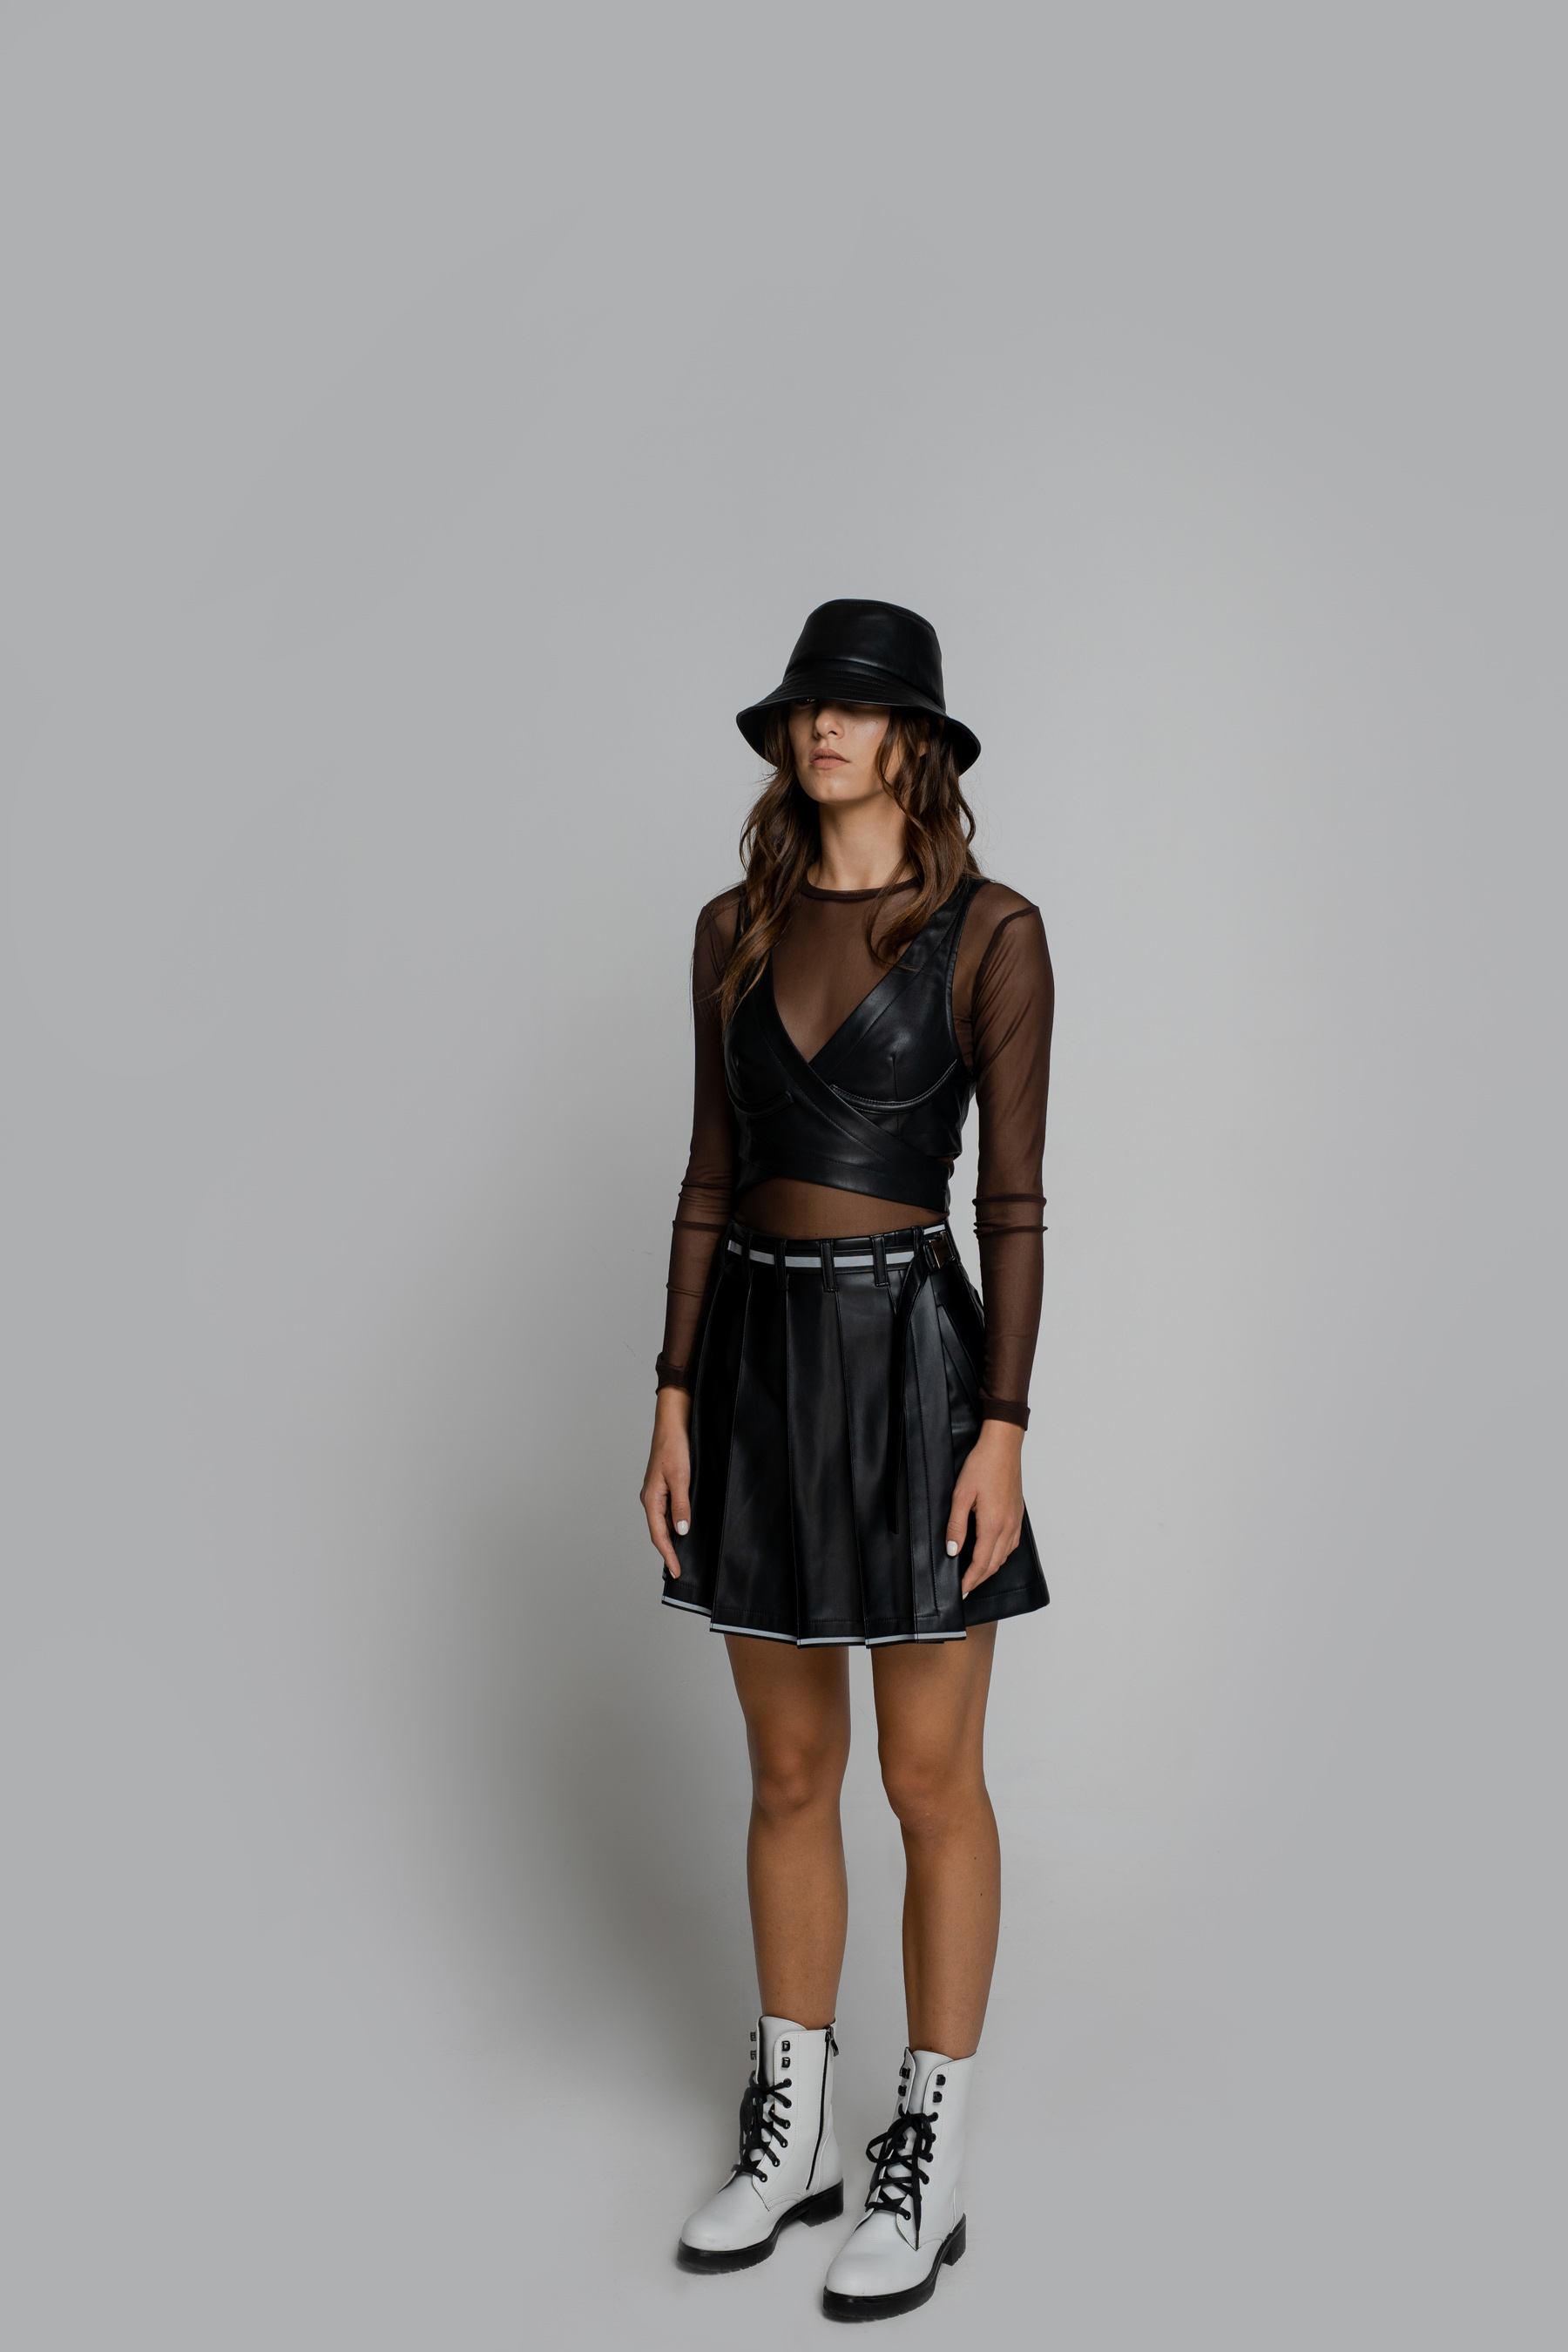 Wisteria ecoleather top in black photo 5